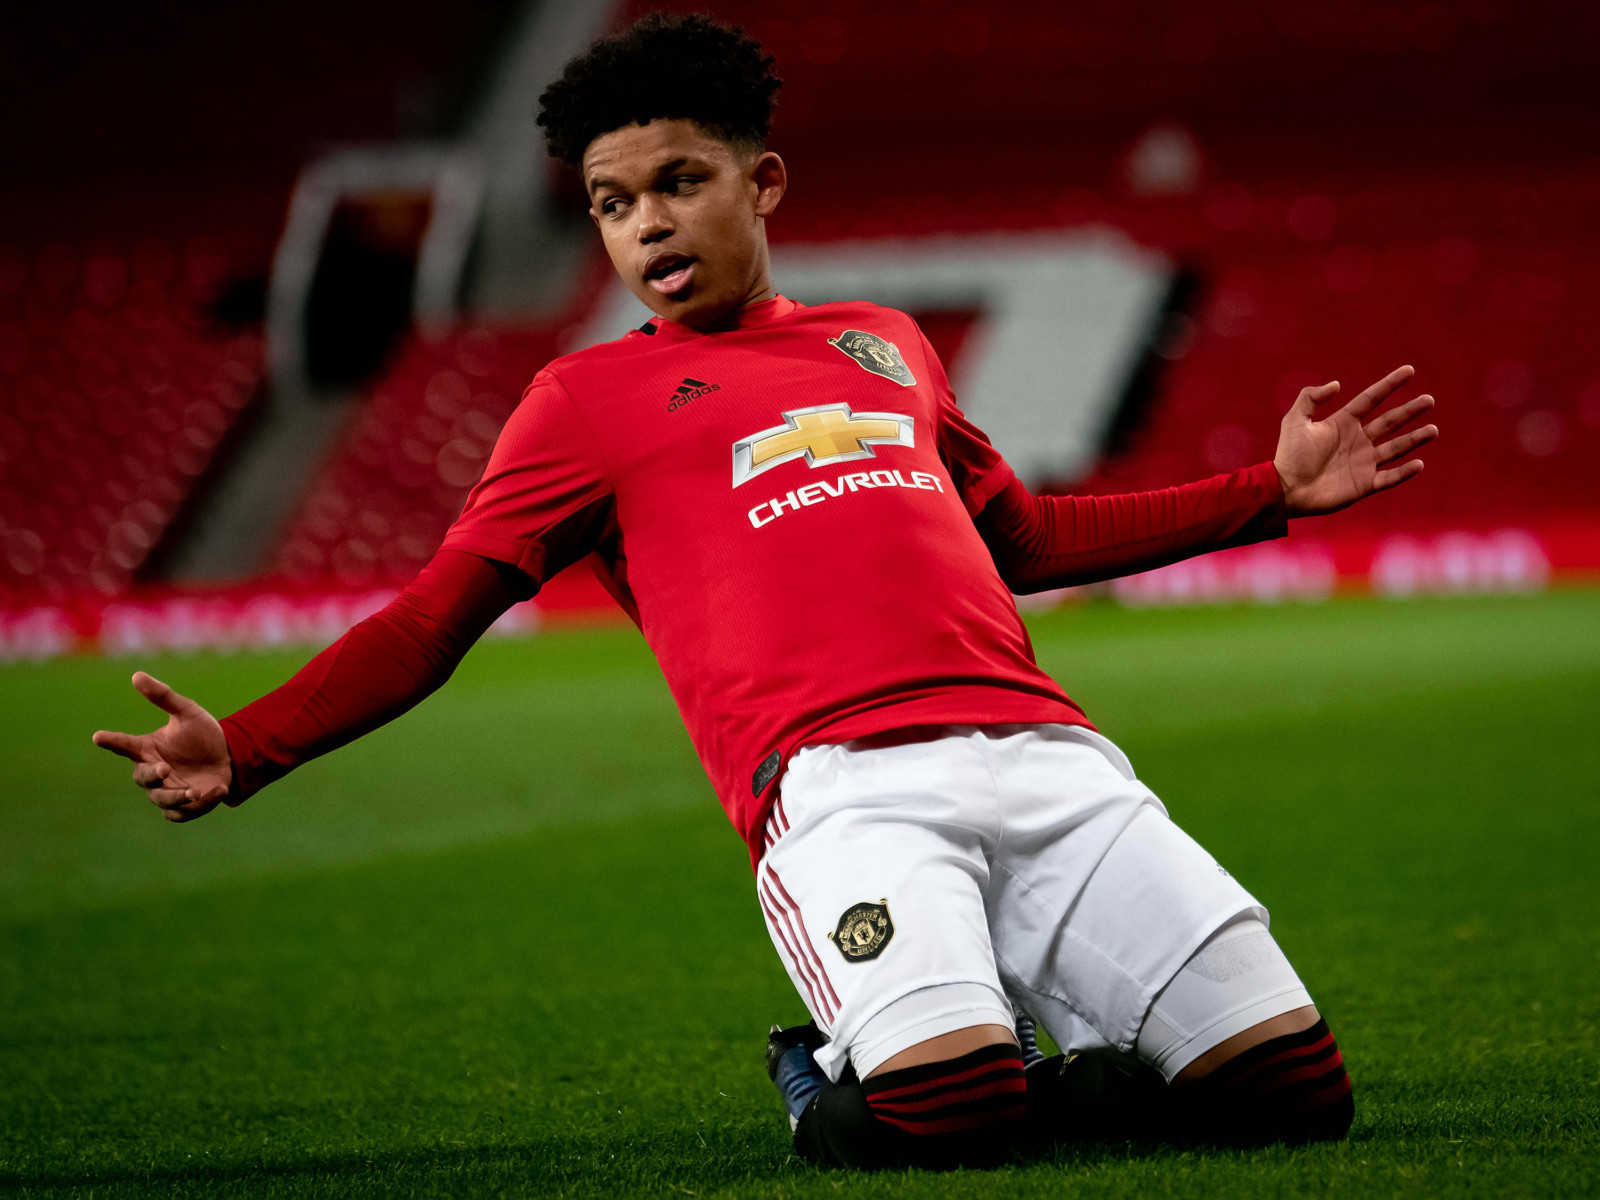 , Man Utd wonderkid Shola Shoretire has been likened to Jay-Jay Okocha and played for the Under-19 team aged just 14